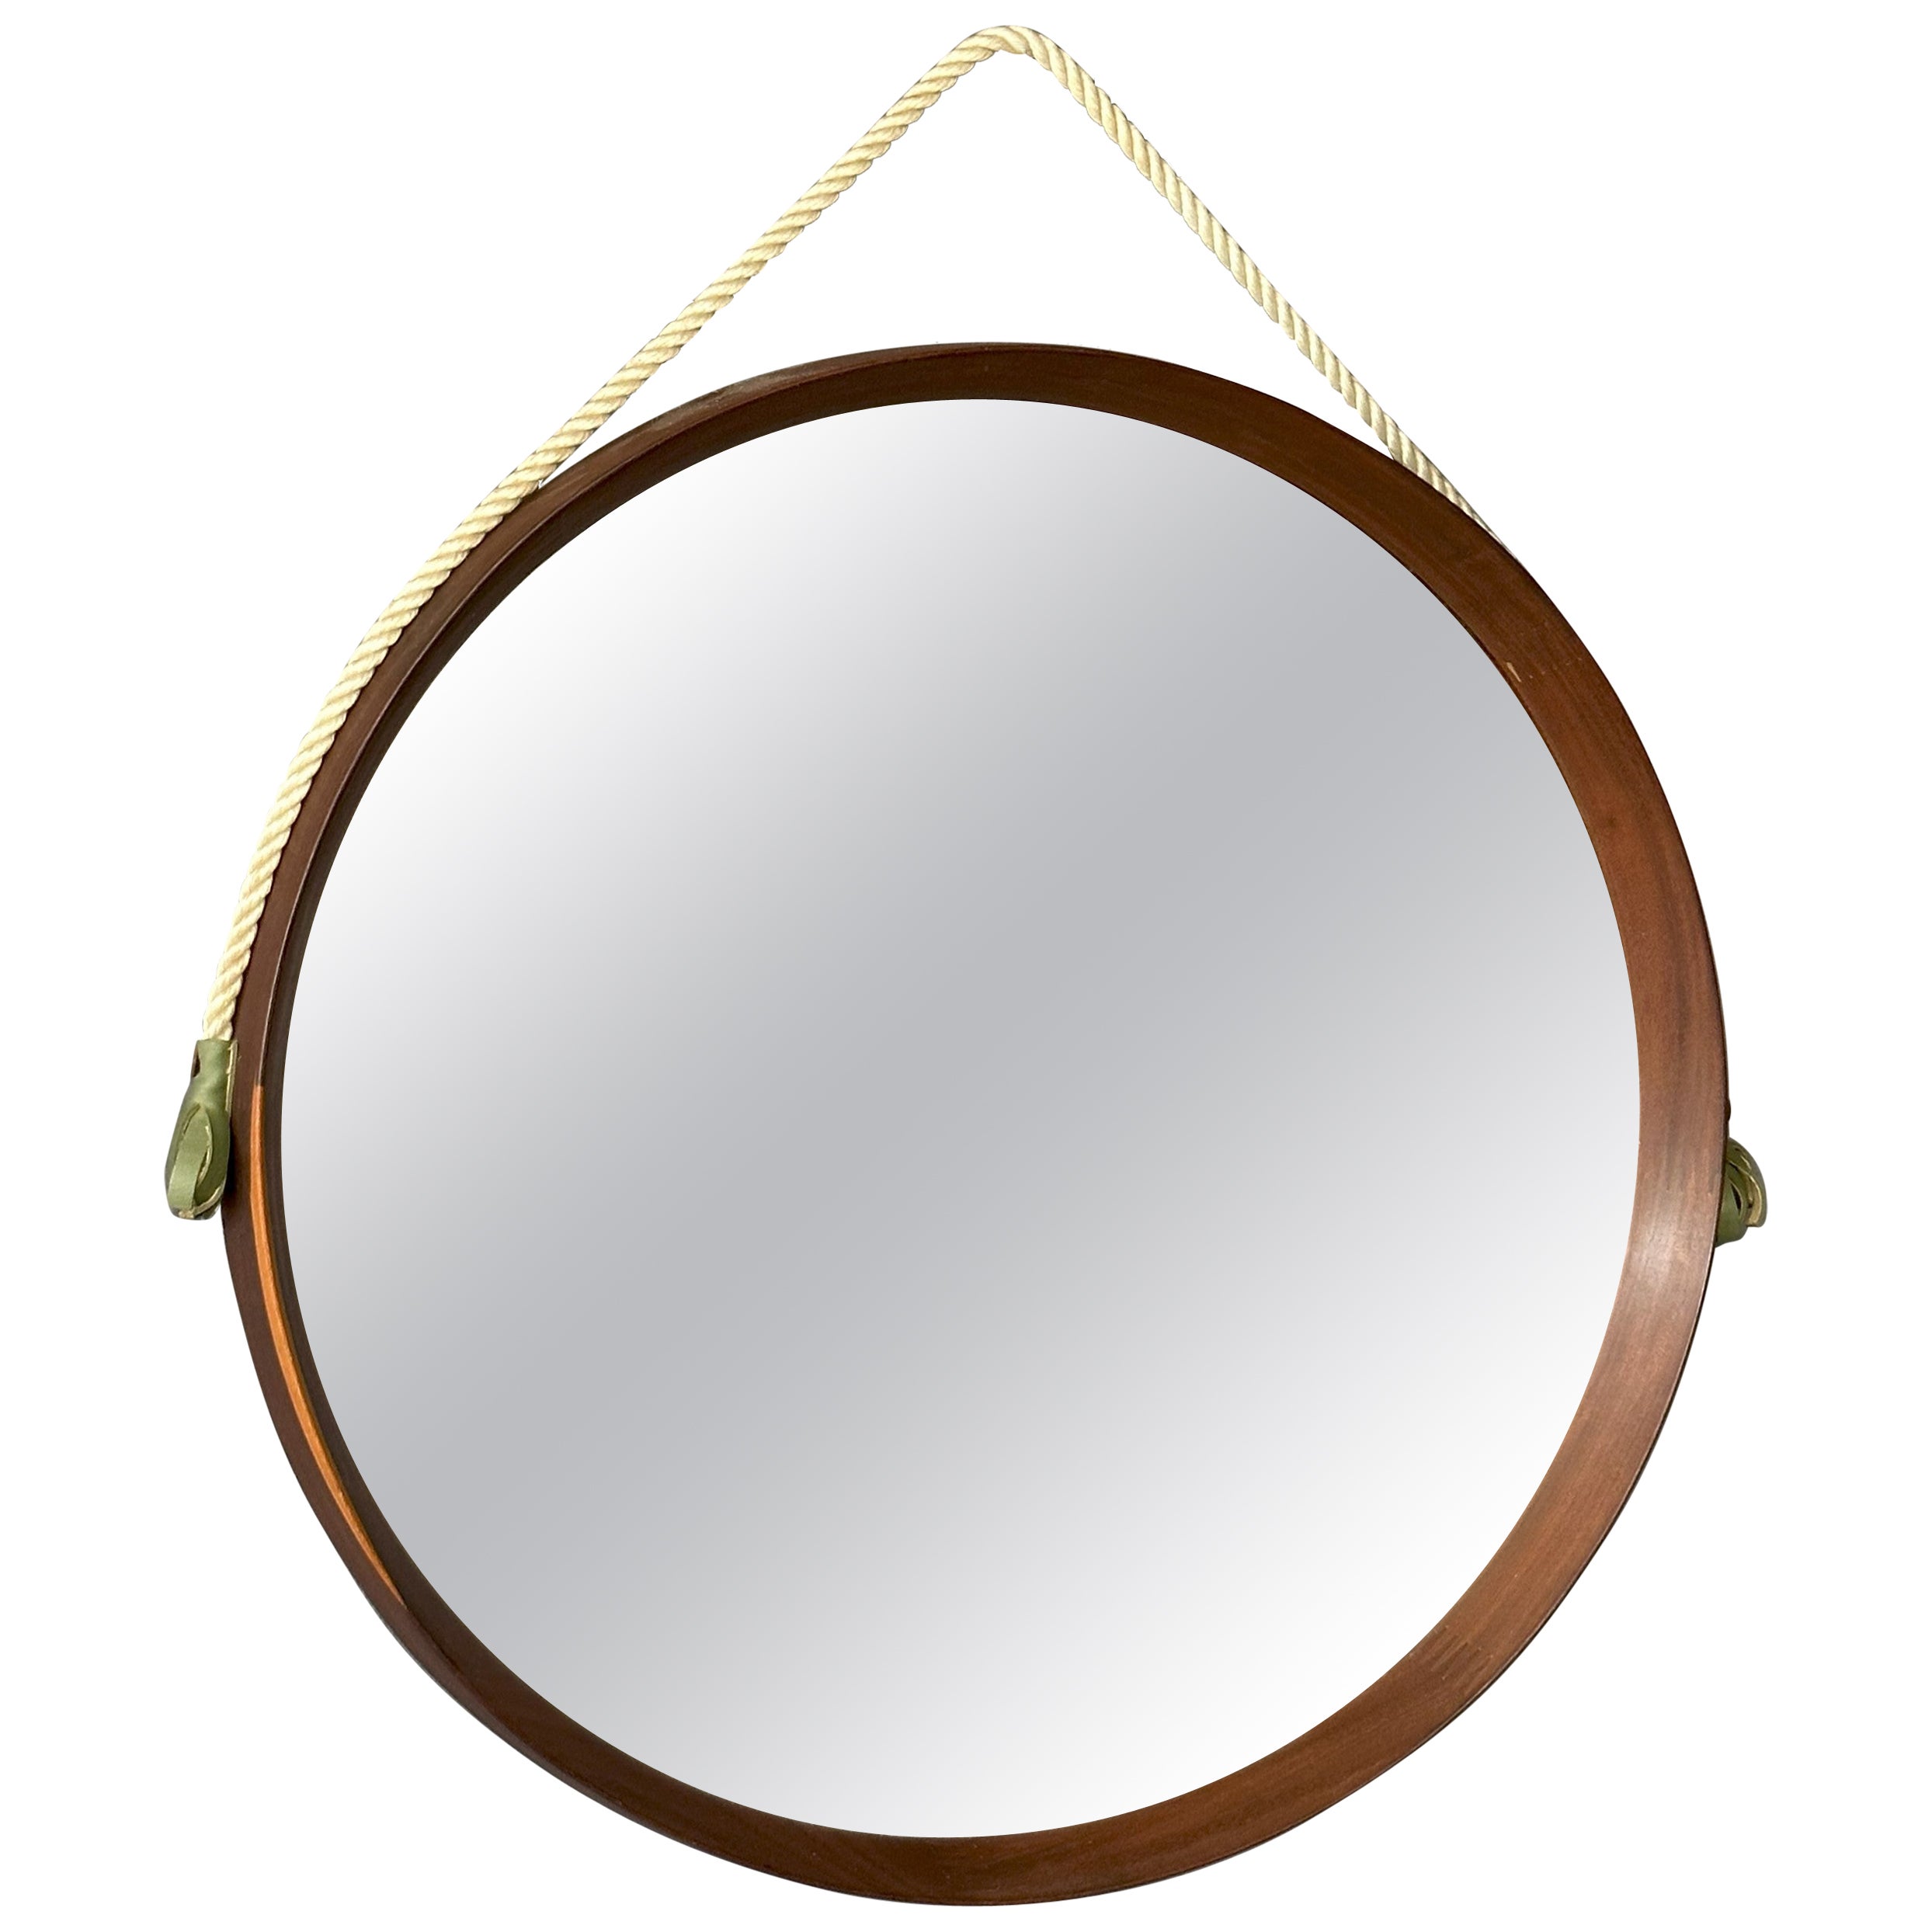 Round mirror with teak frame, 1960s, Italian manufacture, with hanging rope